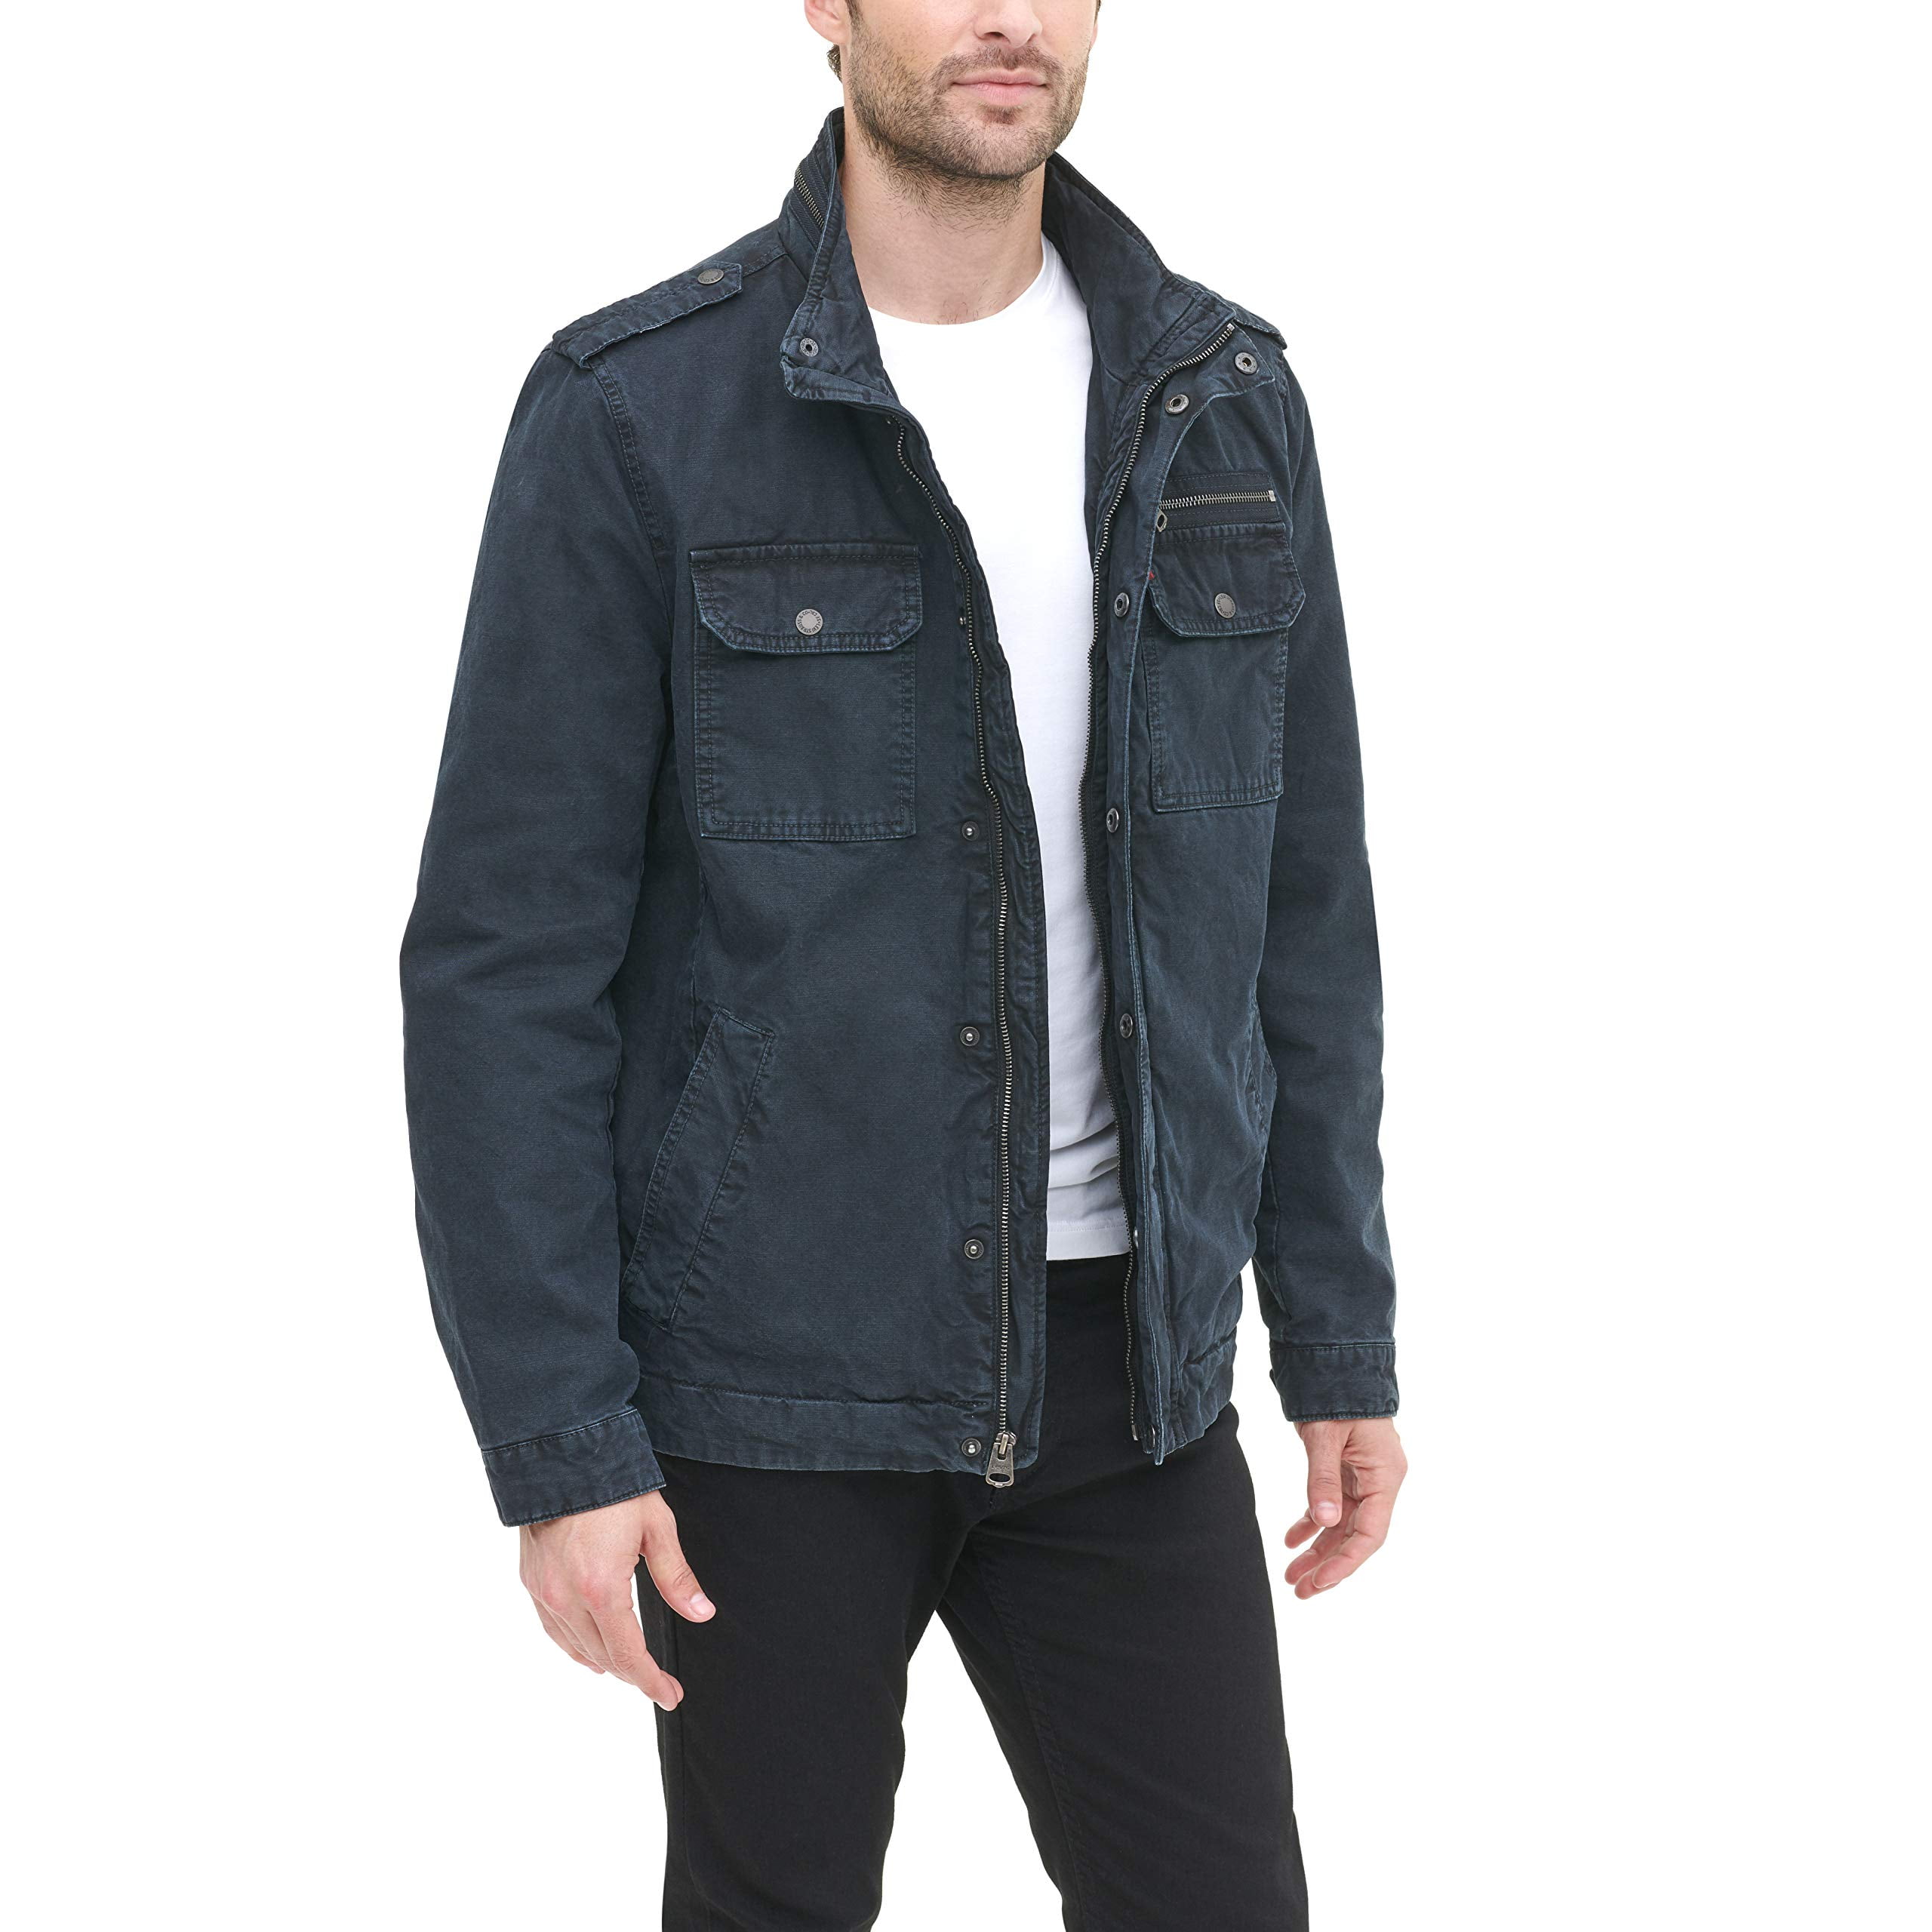 Levi's Men's Big & Tall Washed Cotton Military Jacket, Navy, X-Large Tall -  